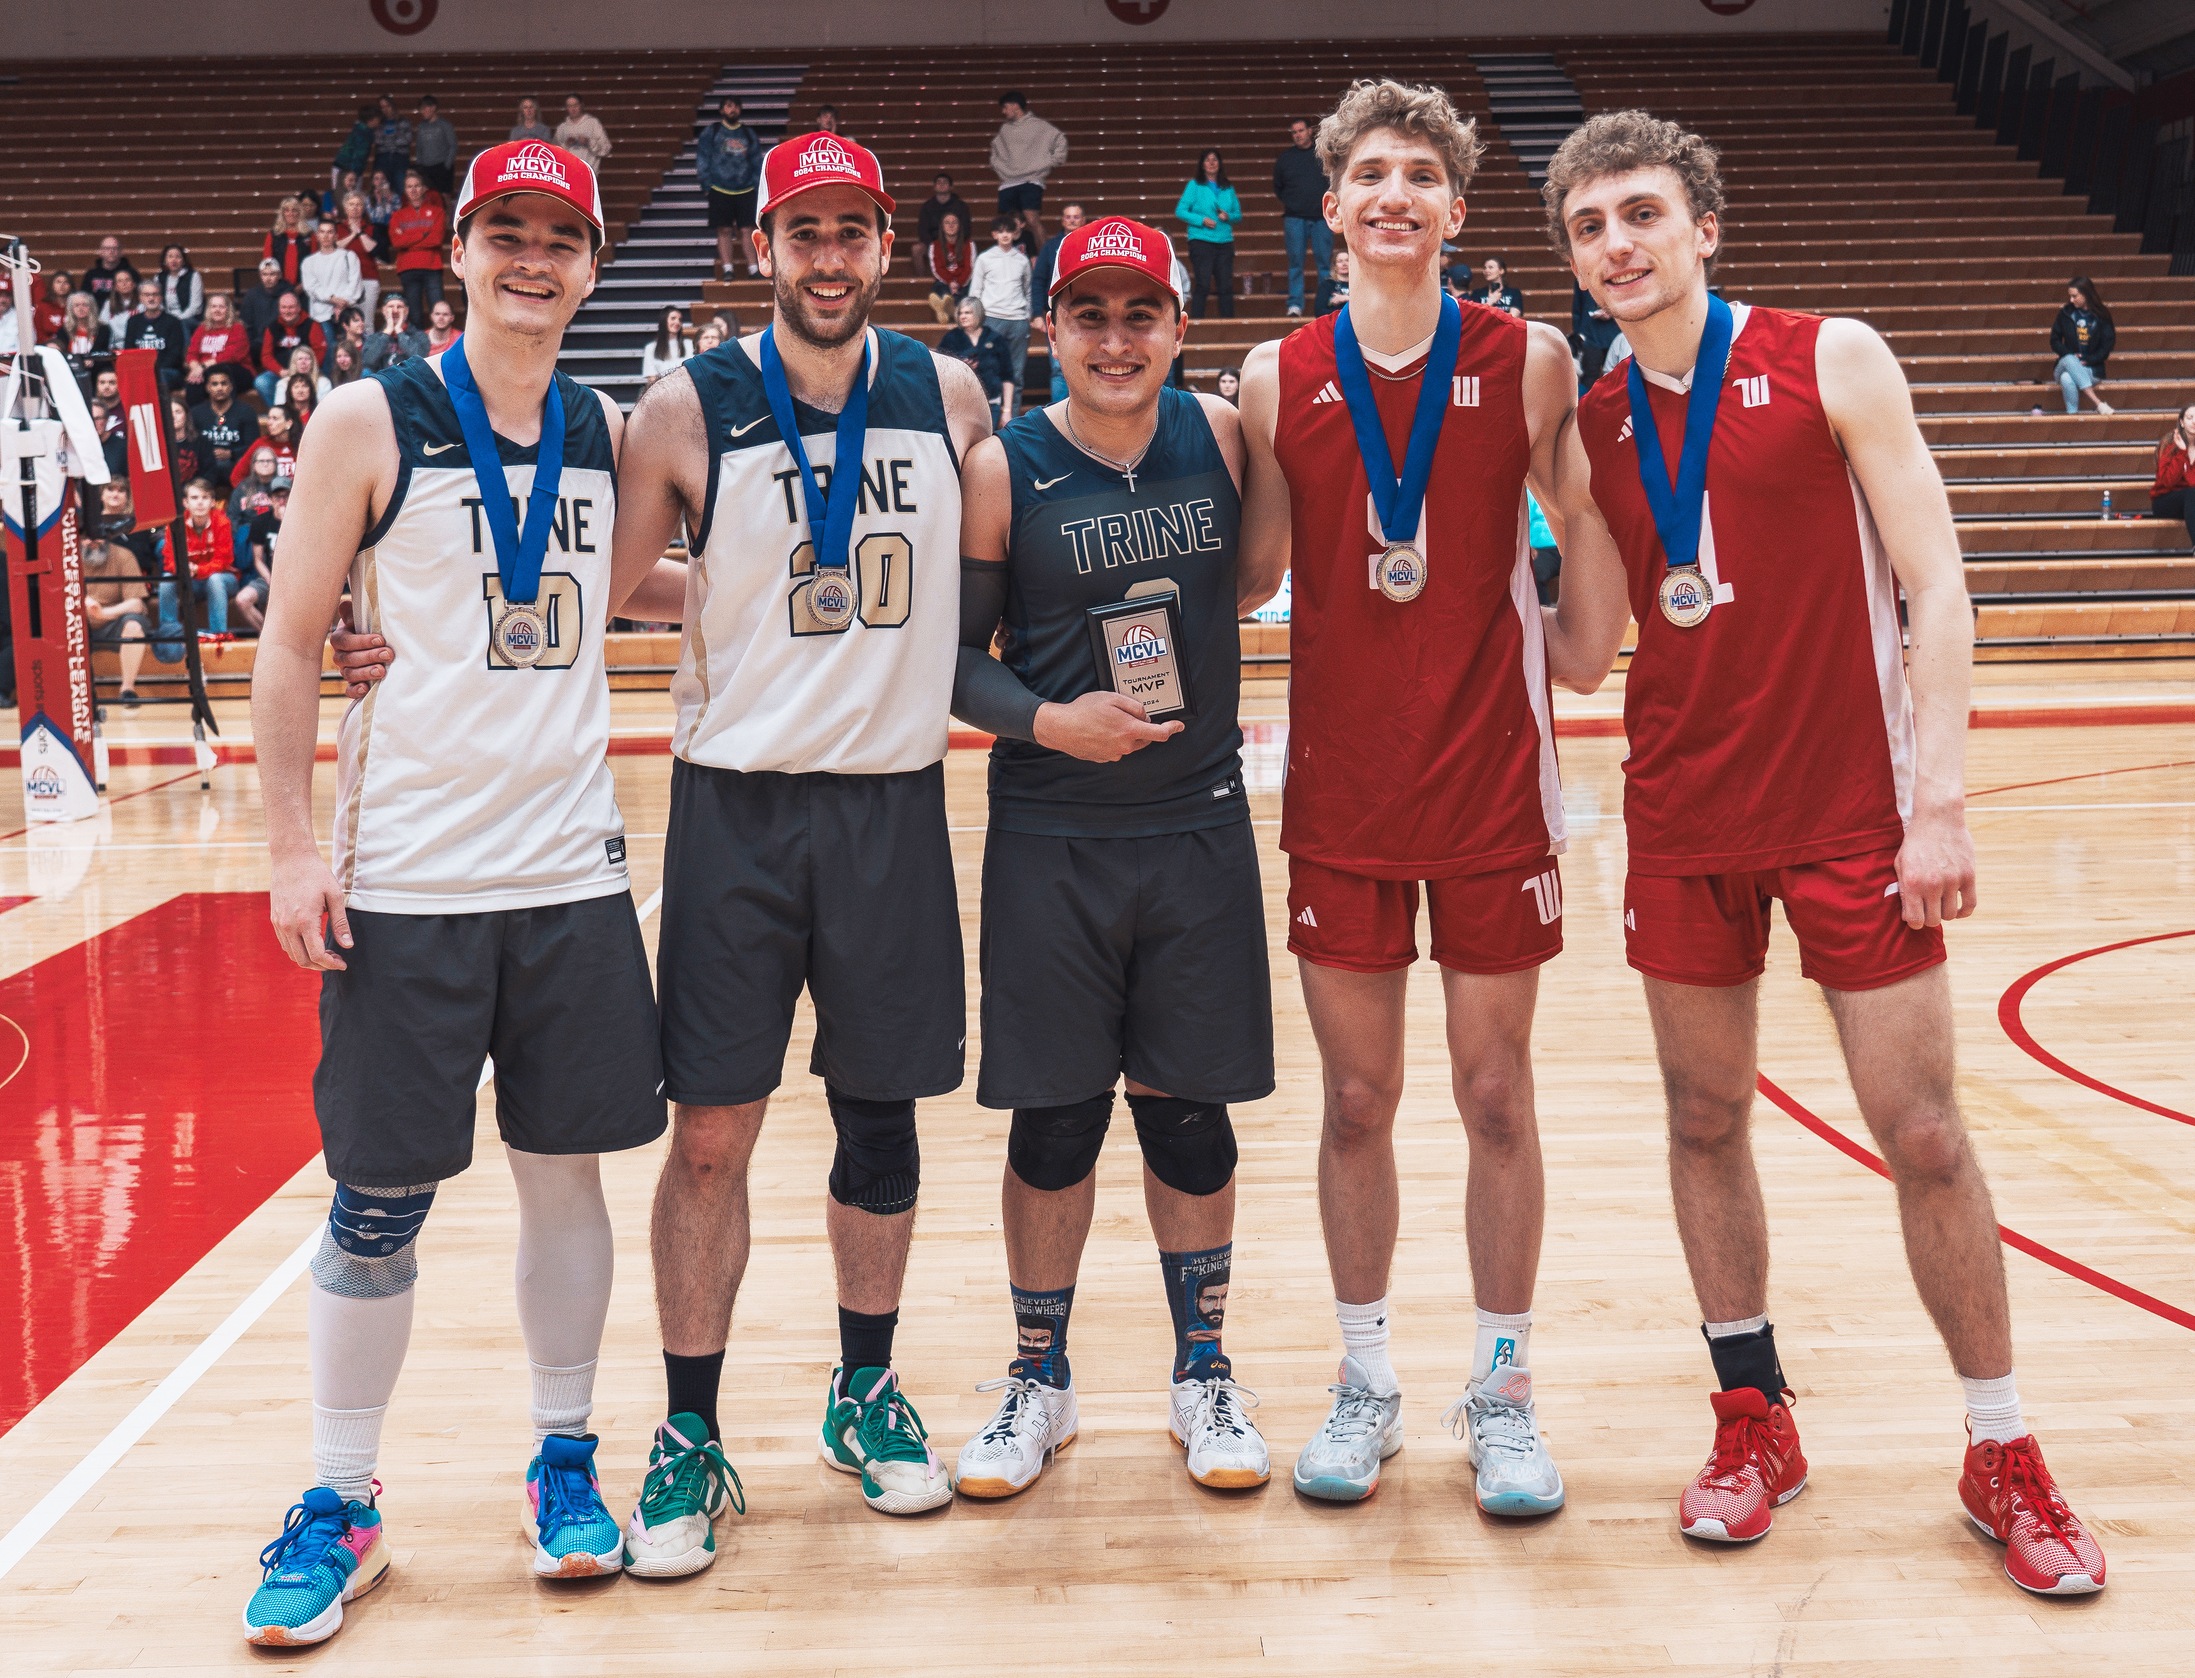 Wittenberg sophomores Michael Yurk (second from right) and Eli Halverson (far right) were named to the MCVL All-Tournament Team following the Tigers' runner-up finish. | Photo by Darin Yrigoyen